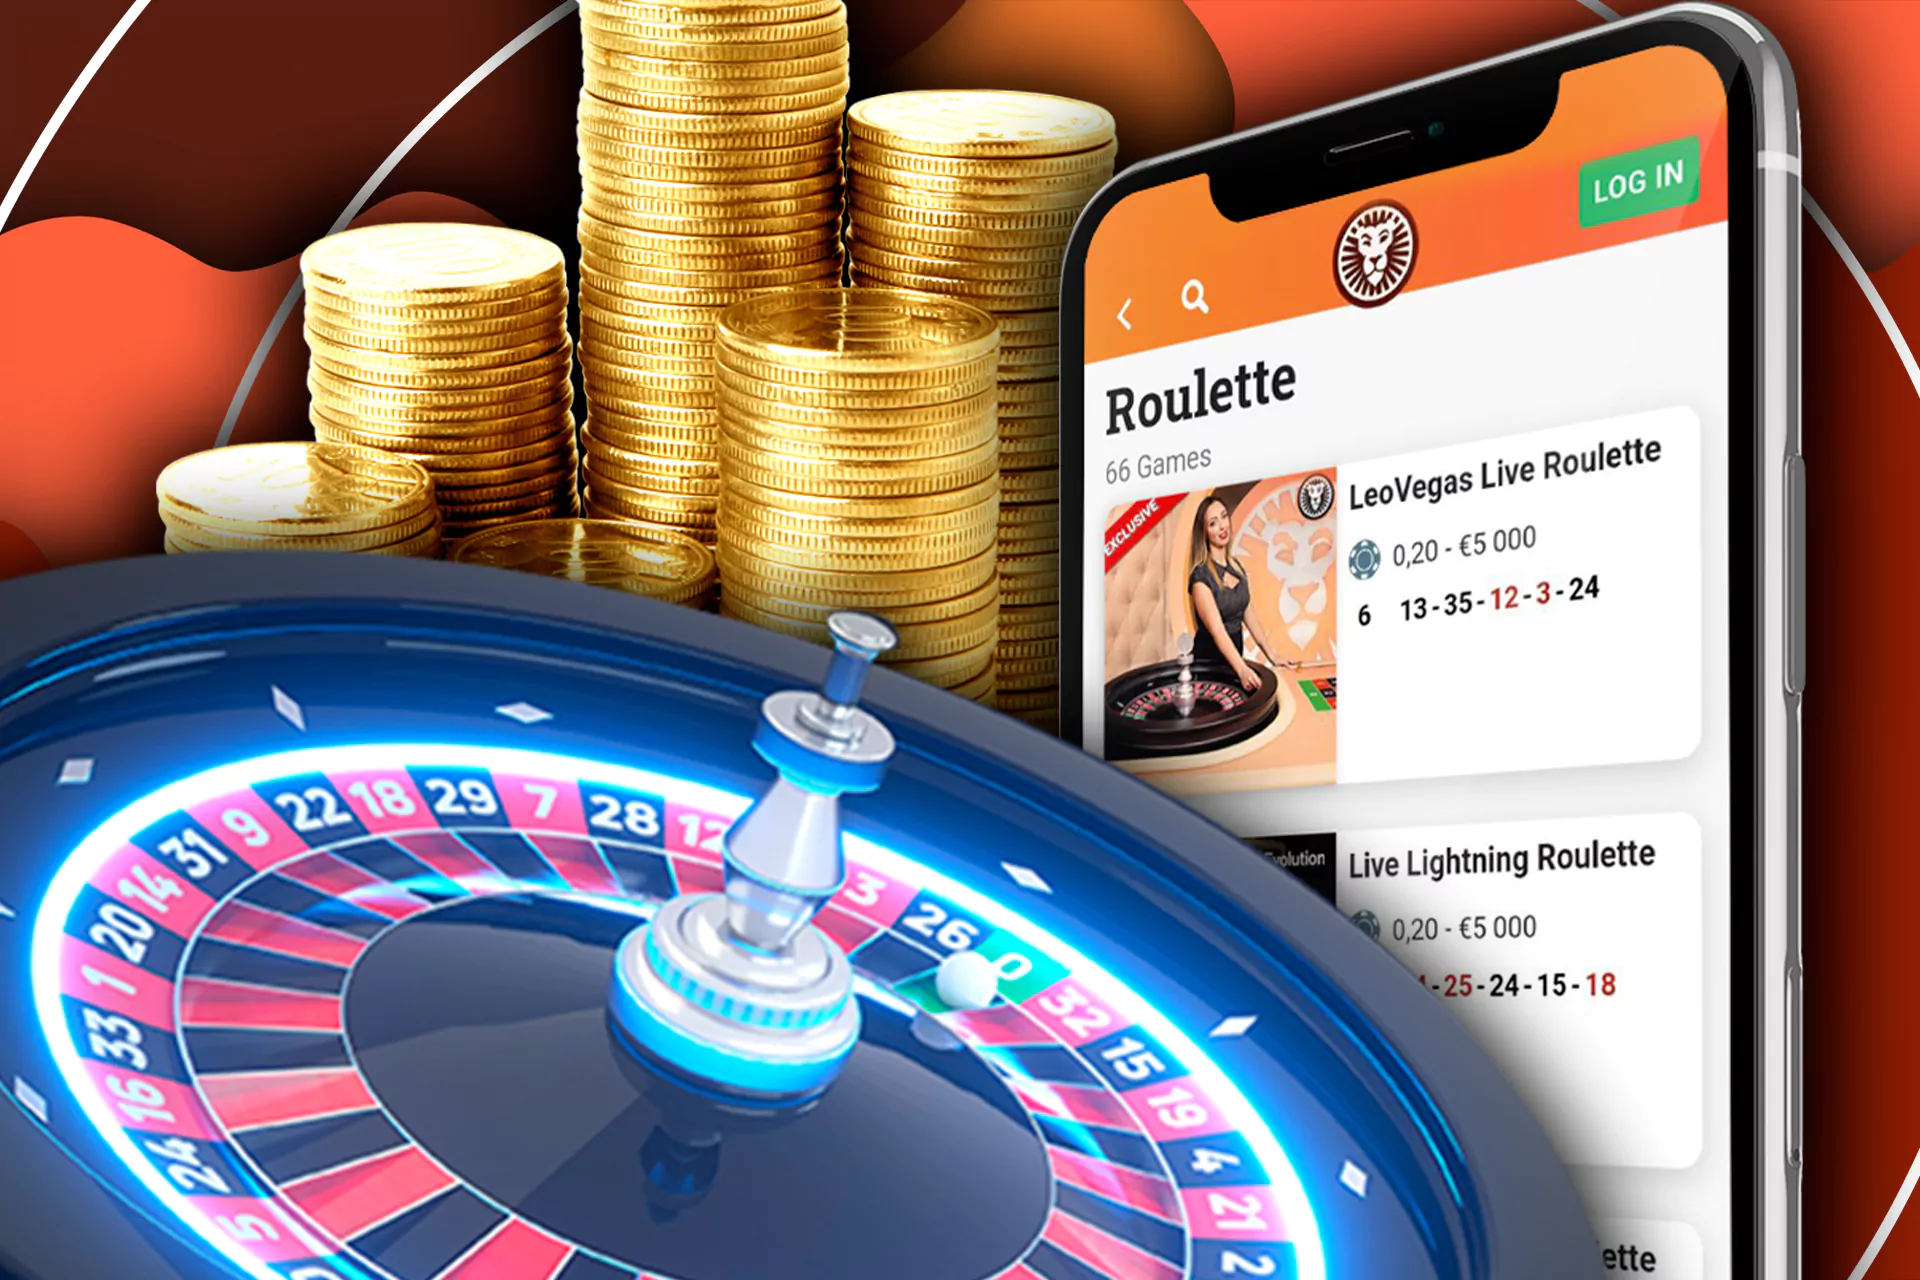 One of the most popular casino games is also available in the app.